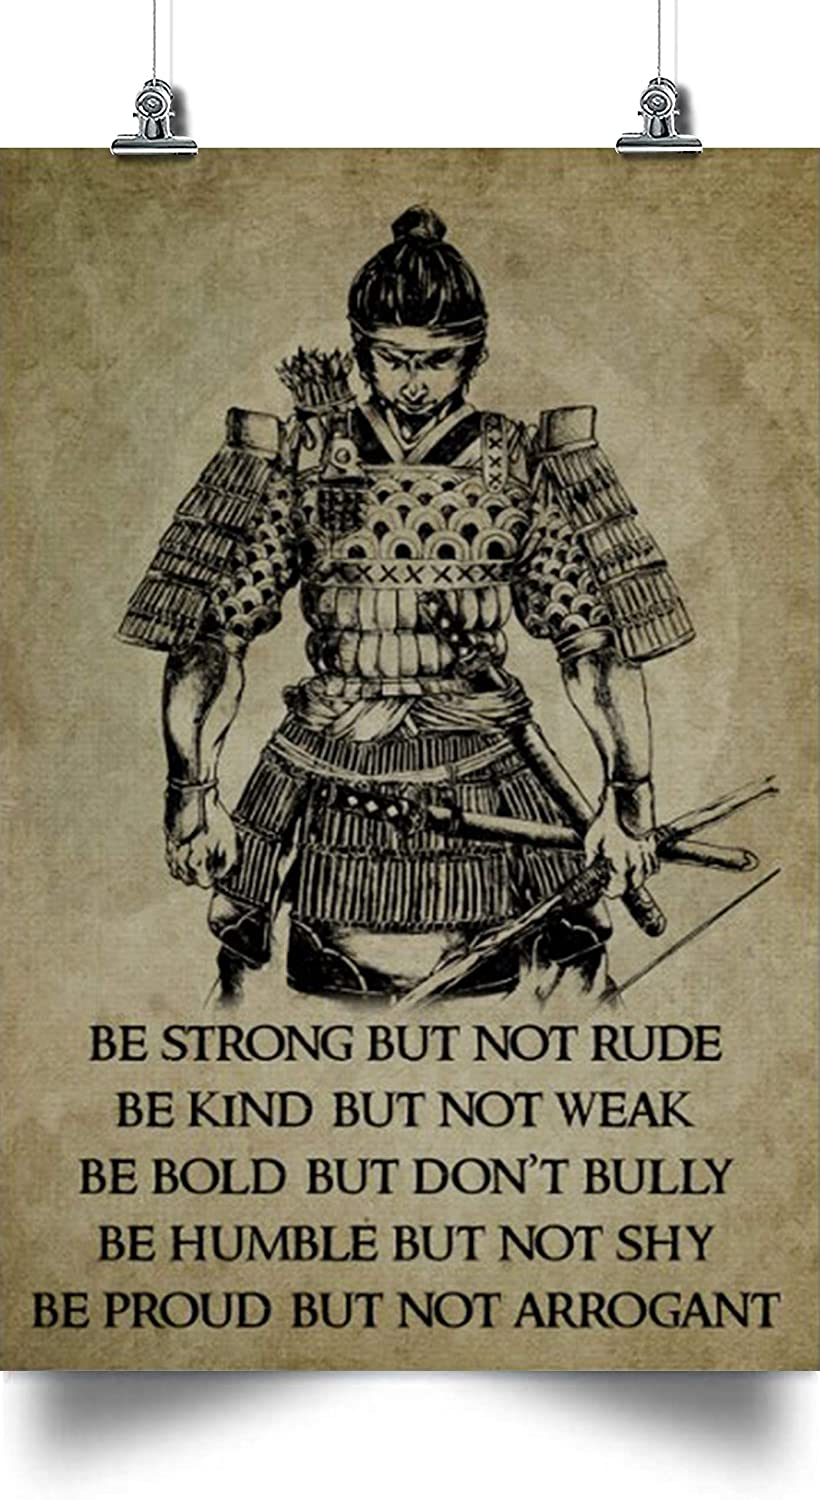 Samurai Poster Wall Art Canvas – Be Strong But Not Rude – Wall Posters, Gifts For Friends And Relatives, Home Decor, Room Decoration.